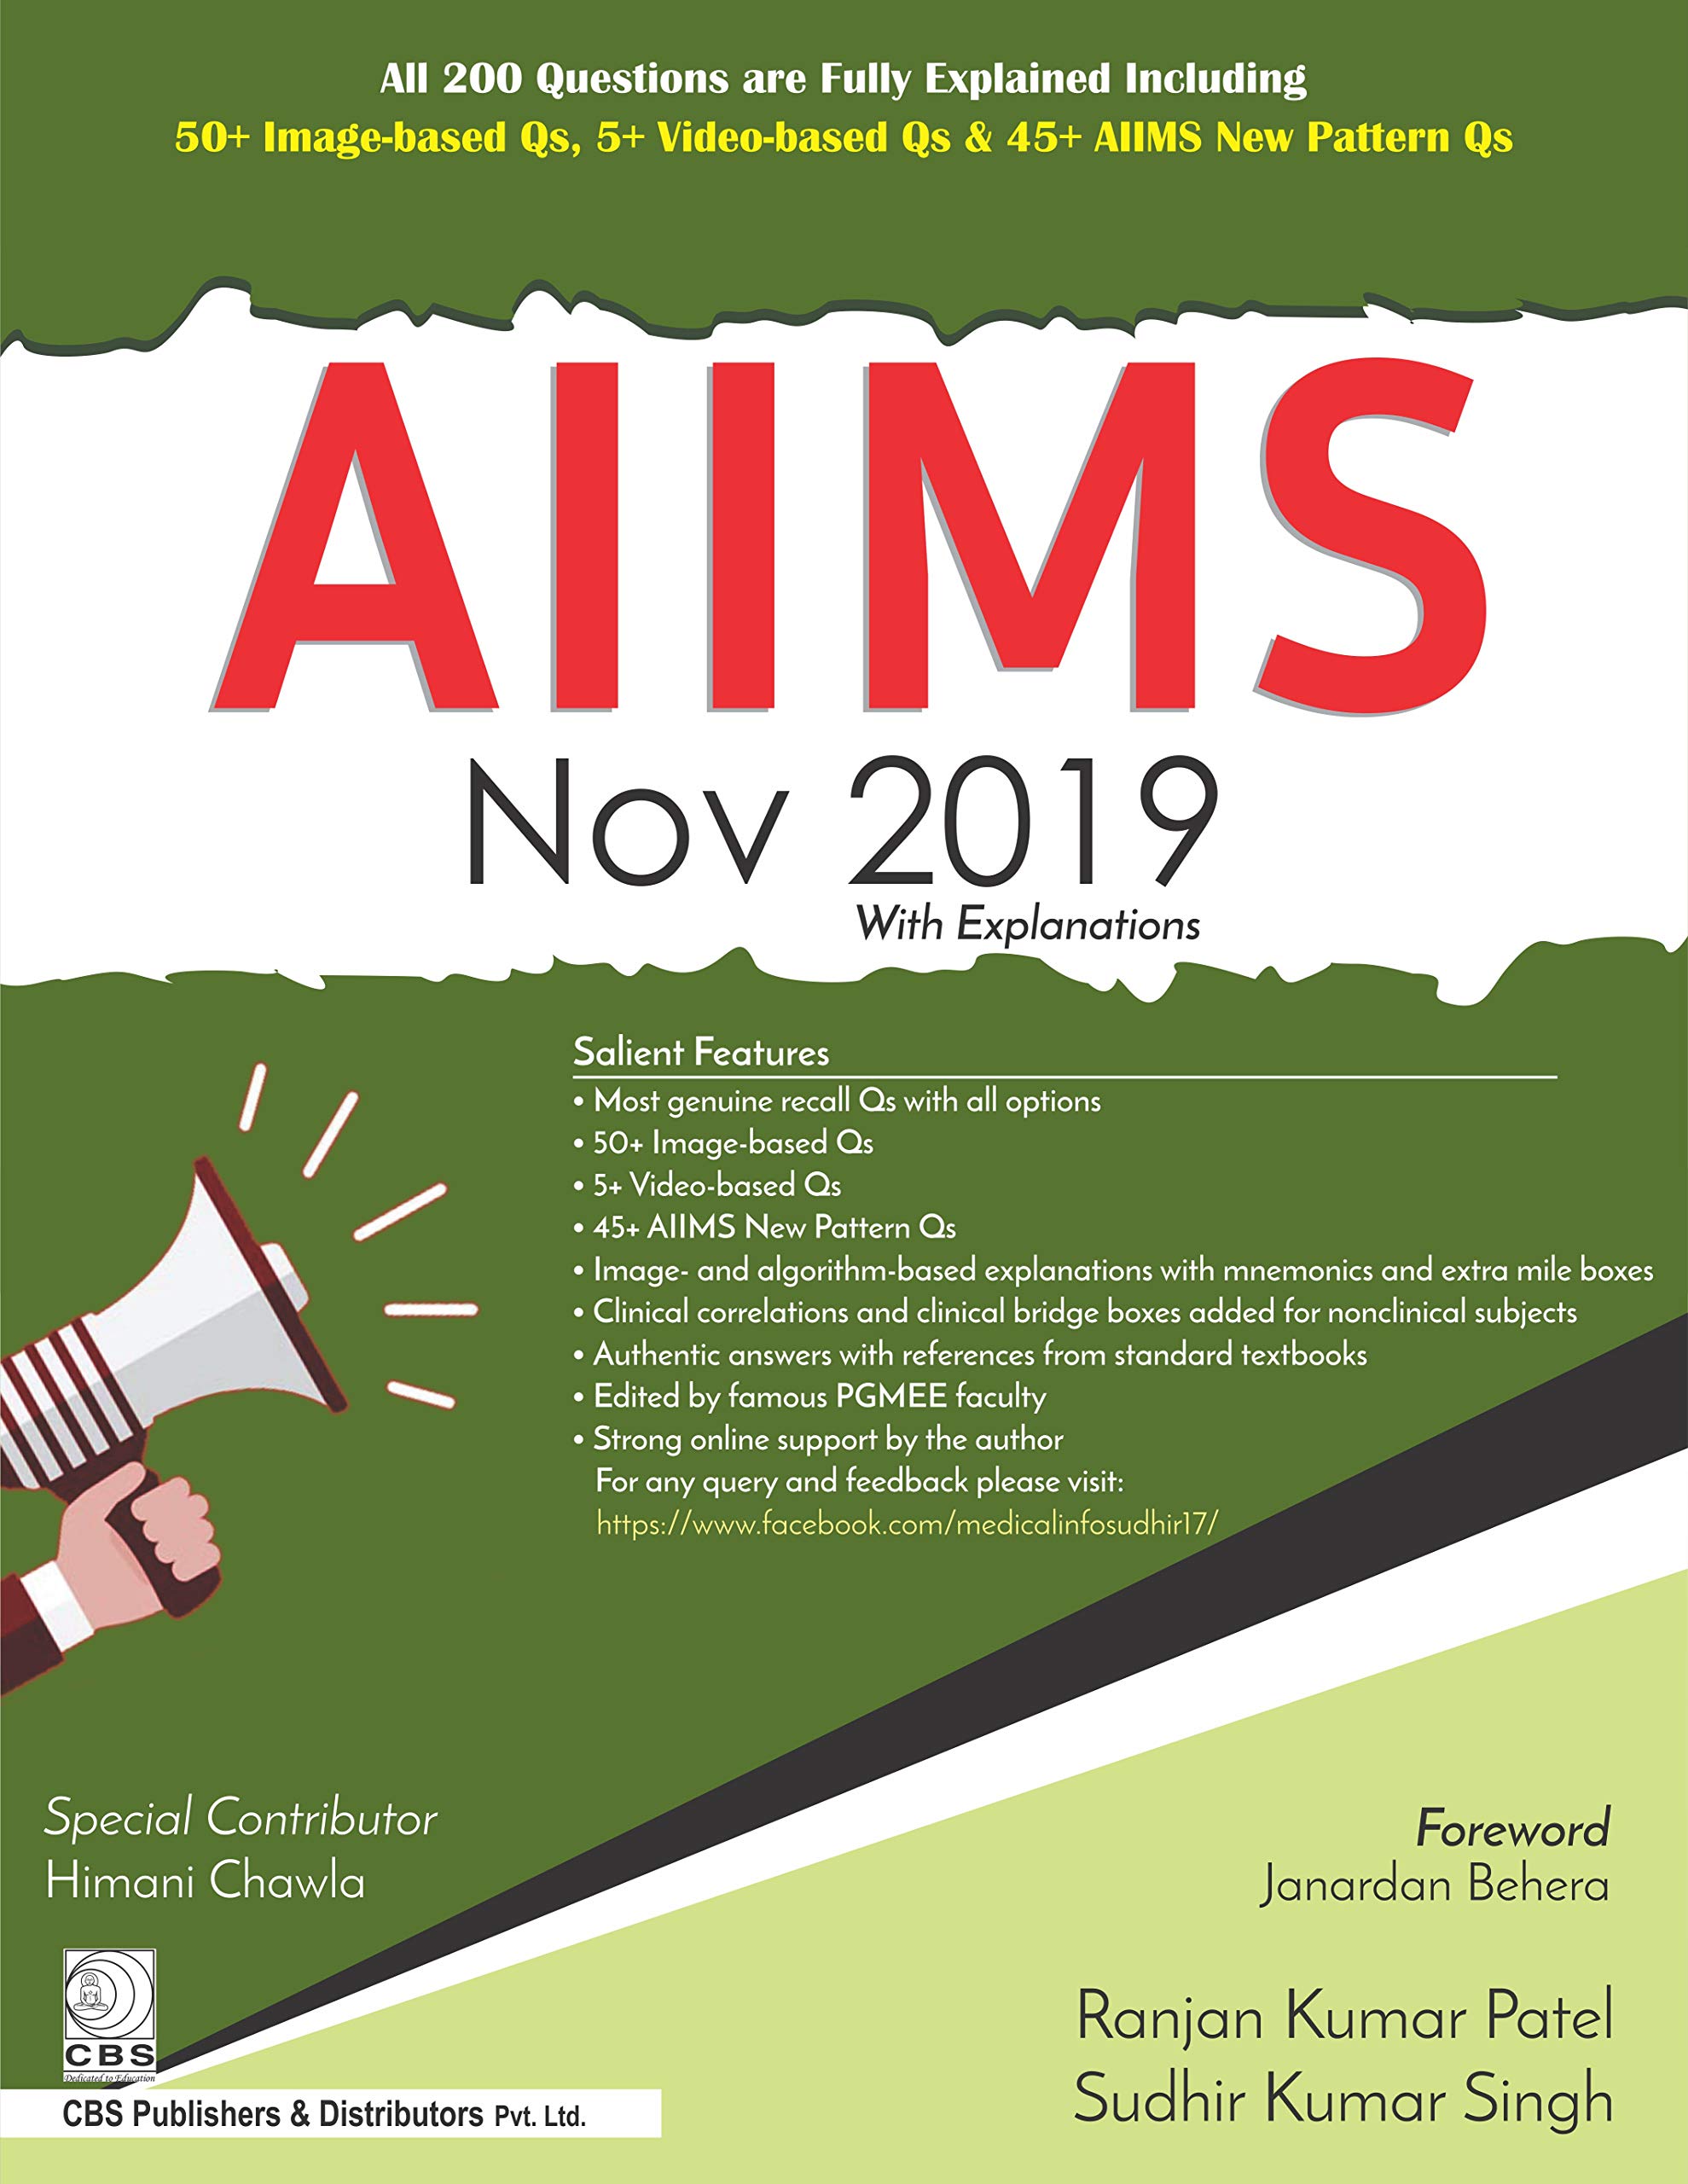 Aiims Nov 2019 With Explanations (Pb)